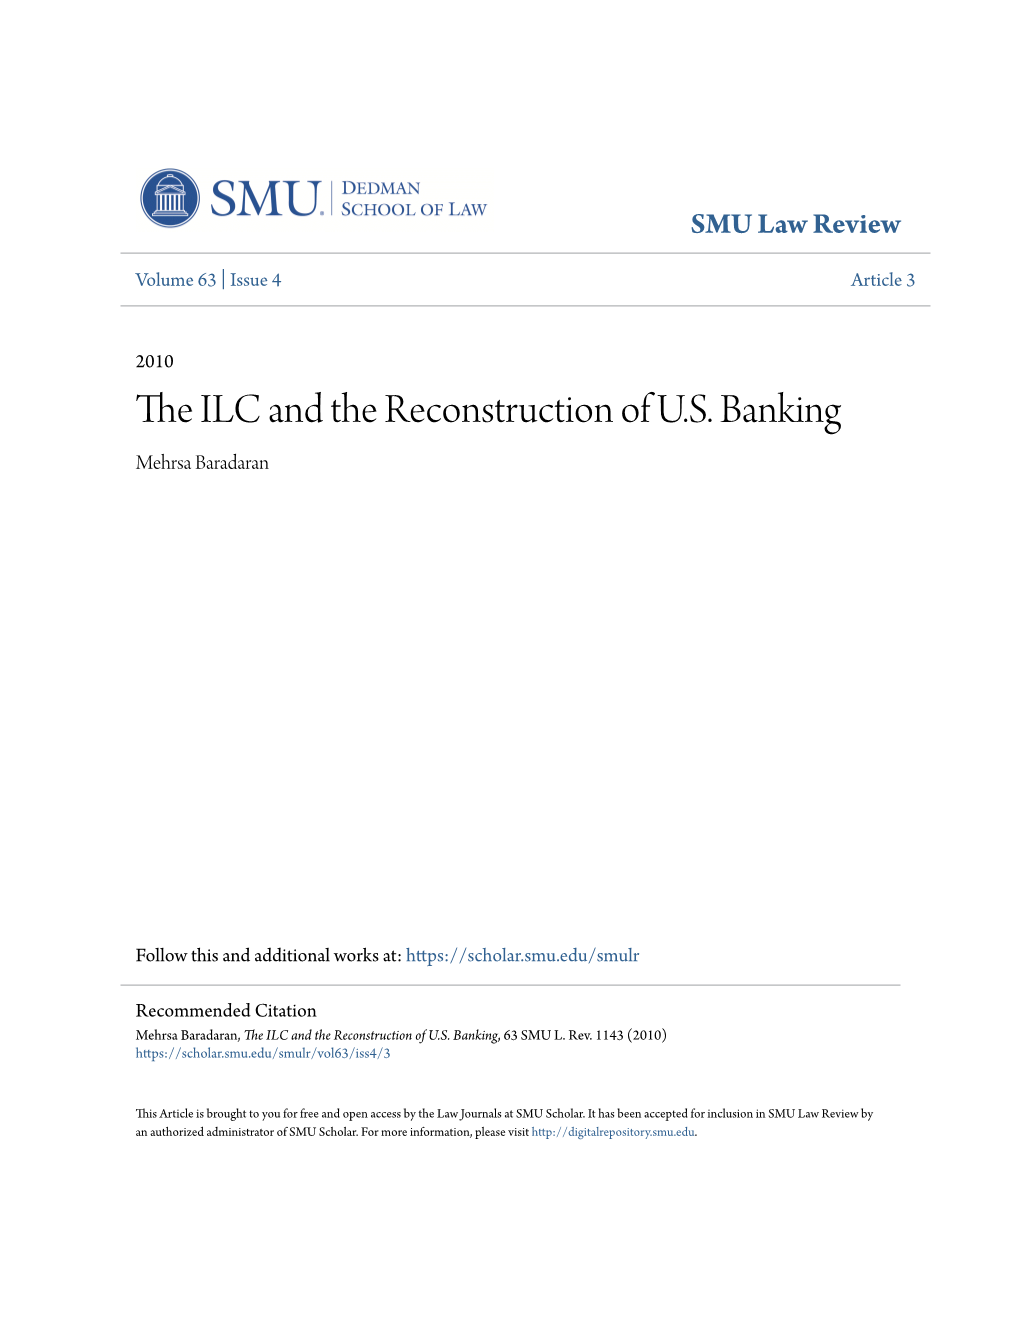 The ILC and the Reconstruction of U.S. Banking Mehrsa Baradaran